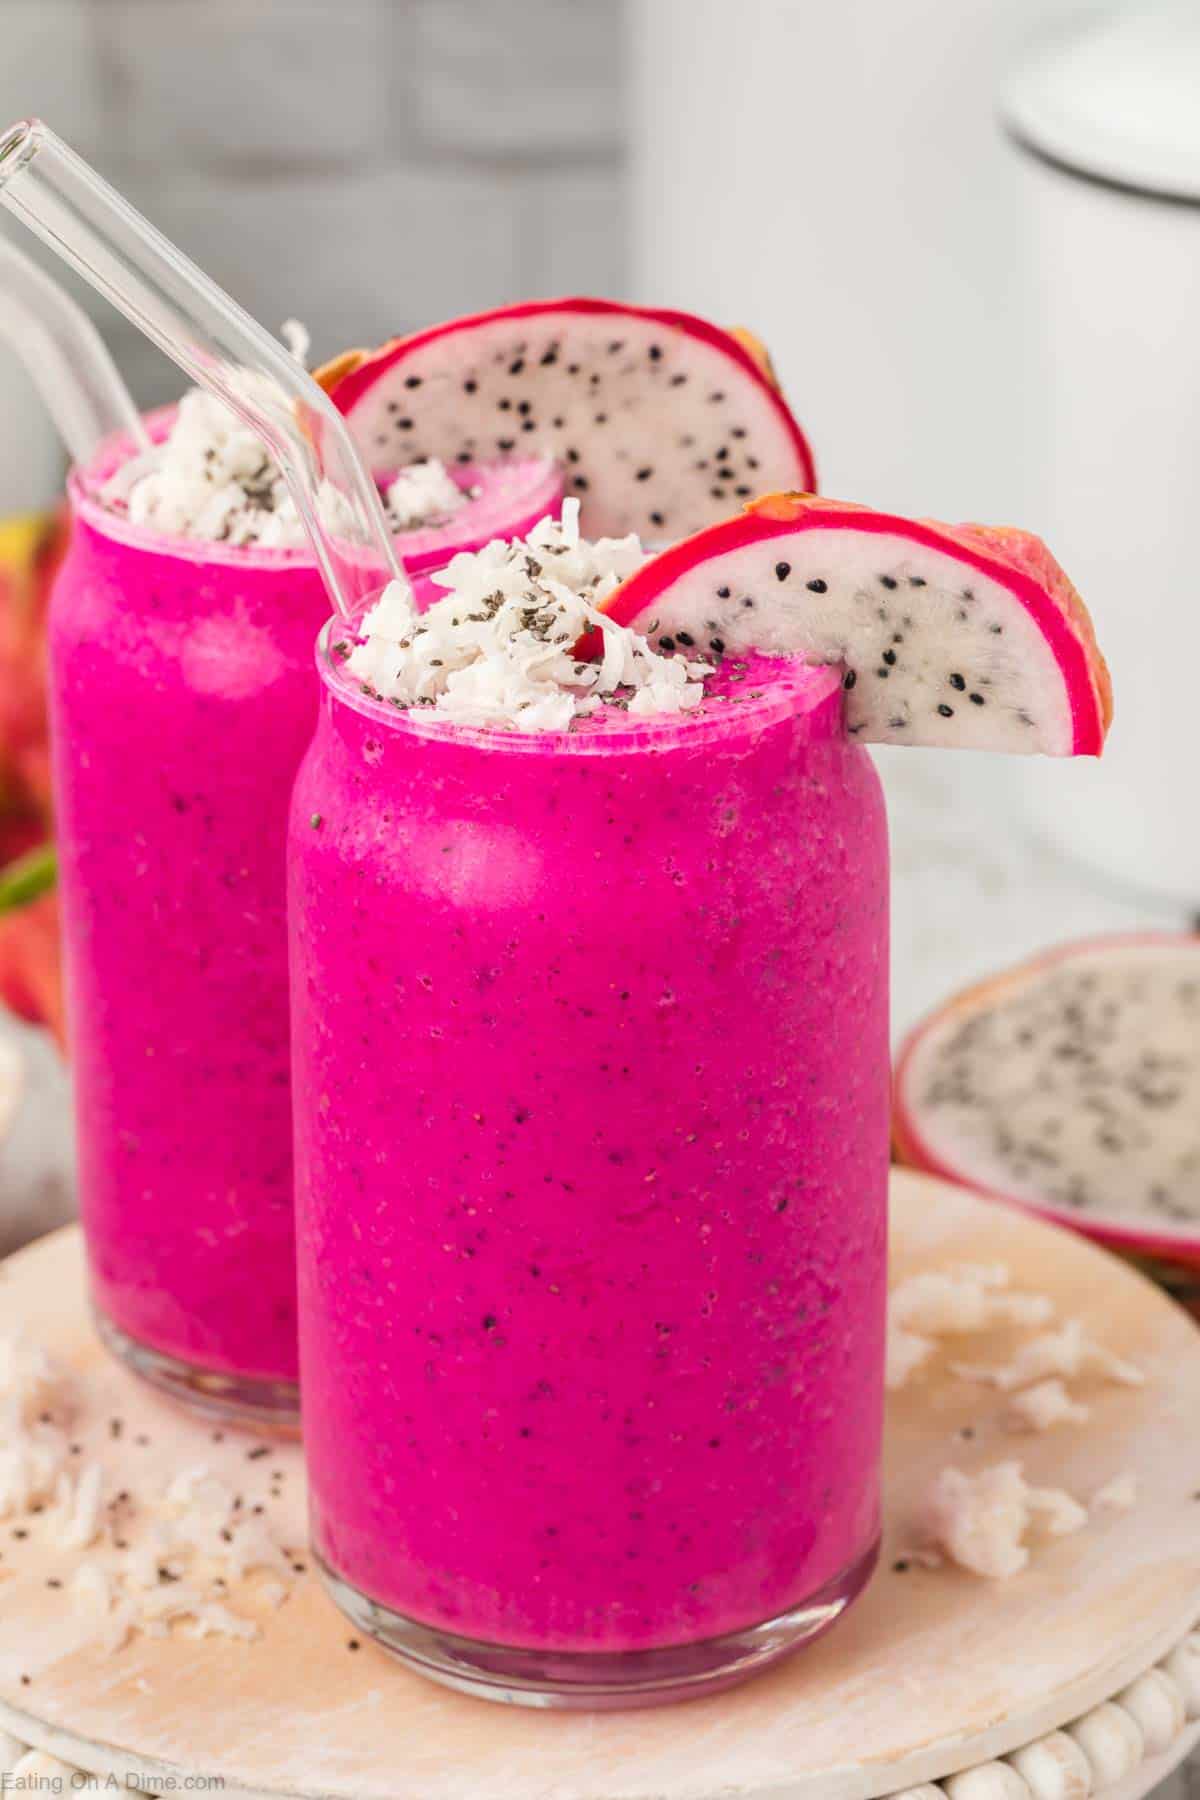 Dragon Fruit Smoothies in a clear glass topped with shredded coconut, slice of dragon fruit